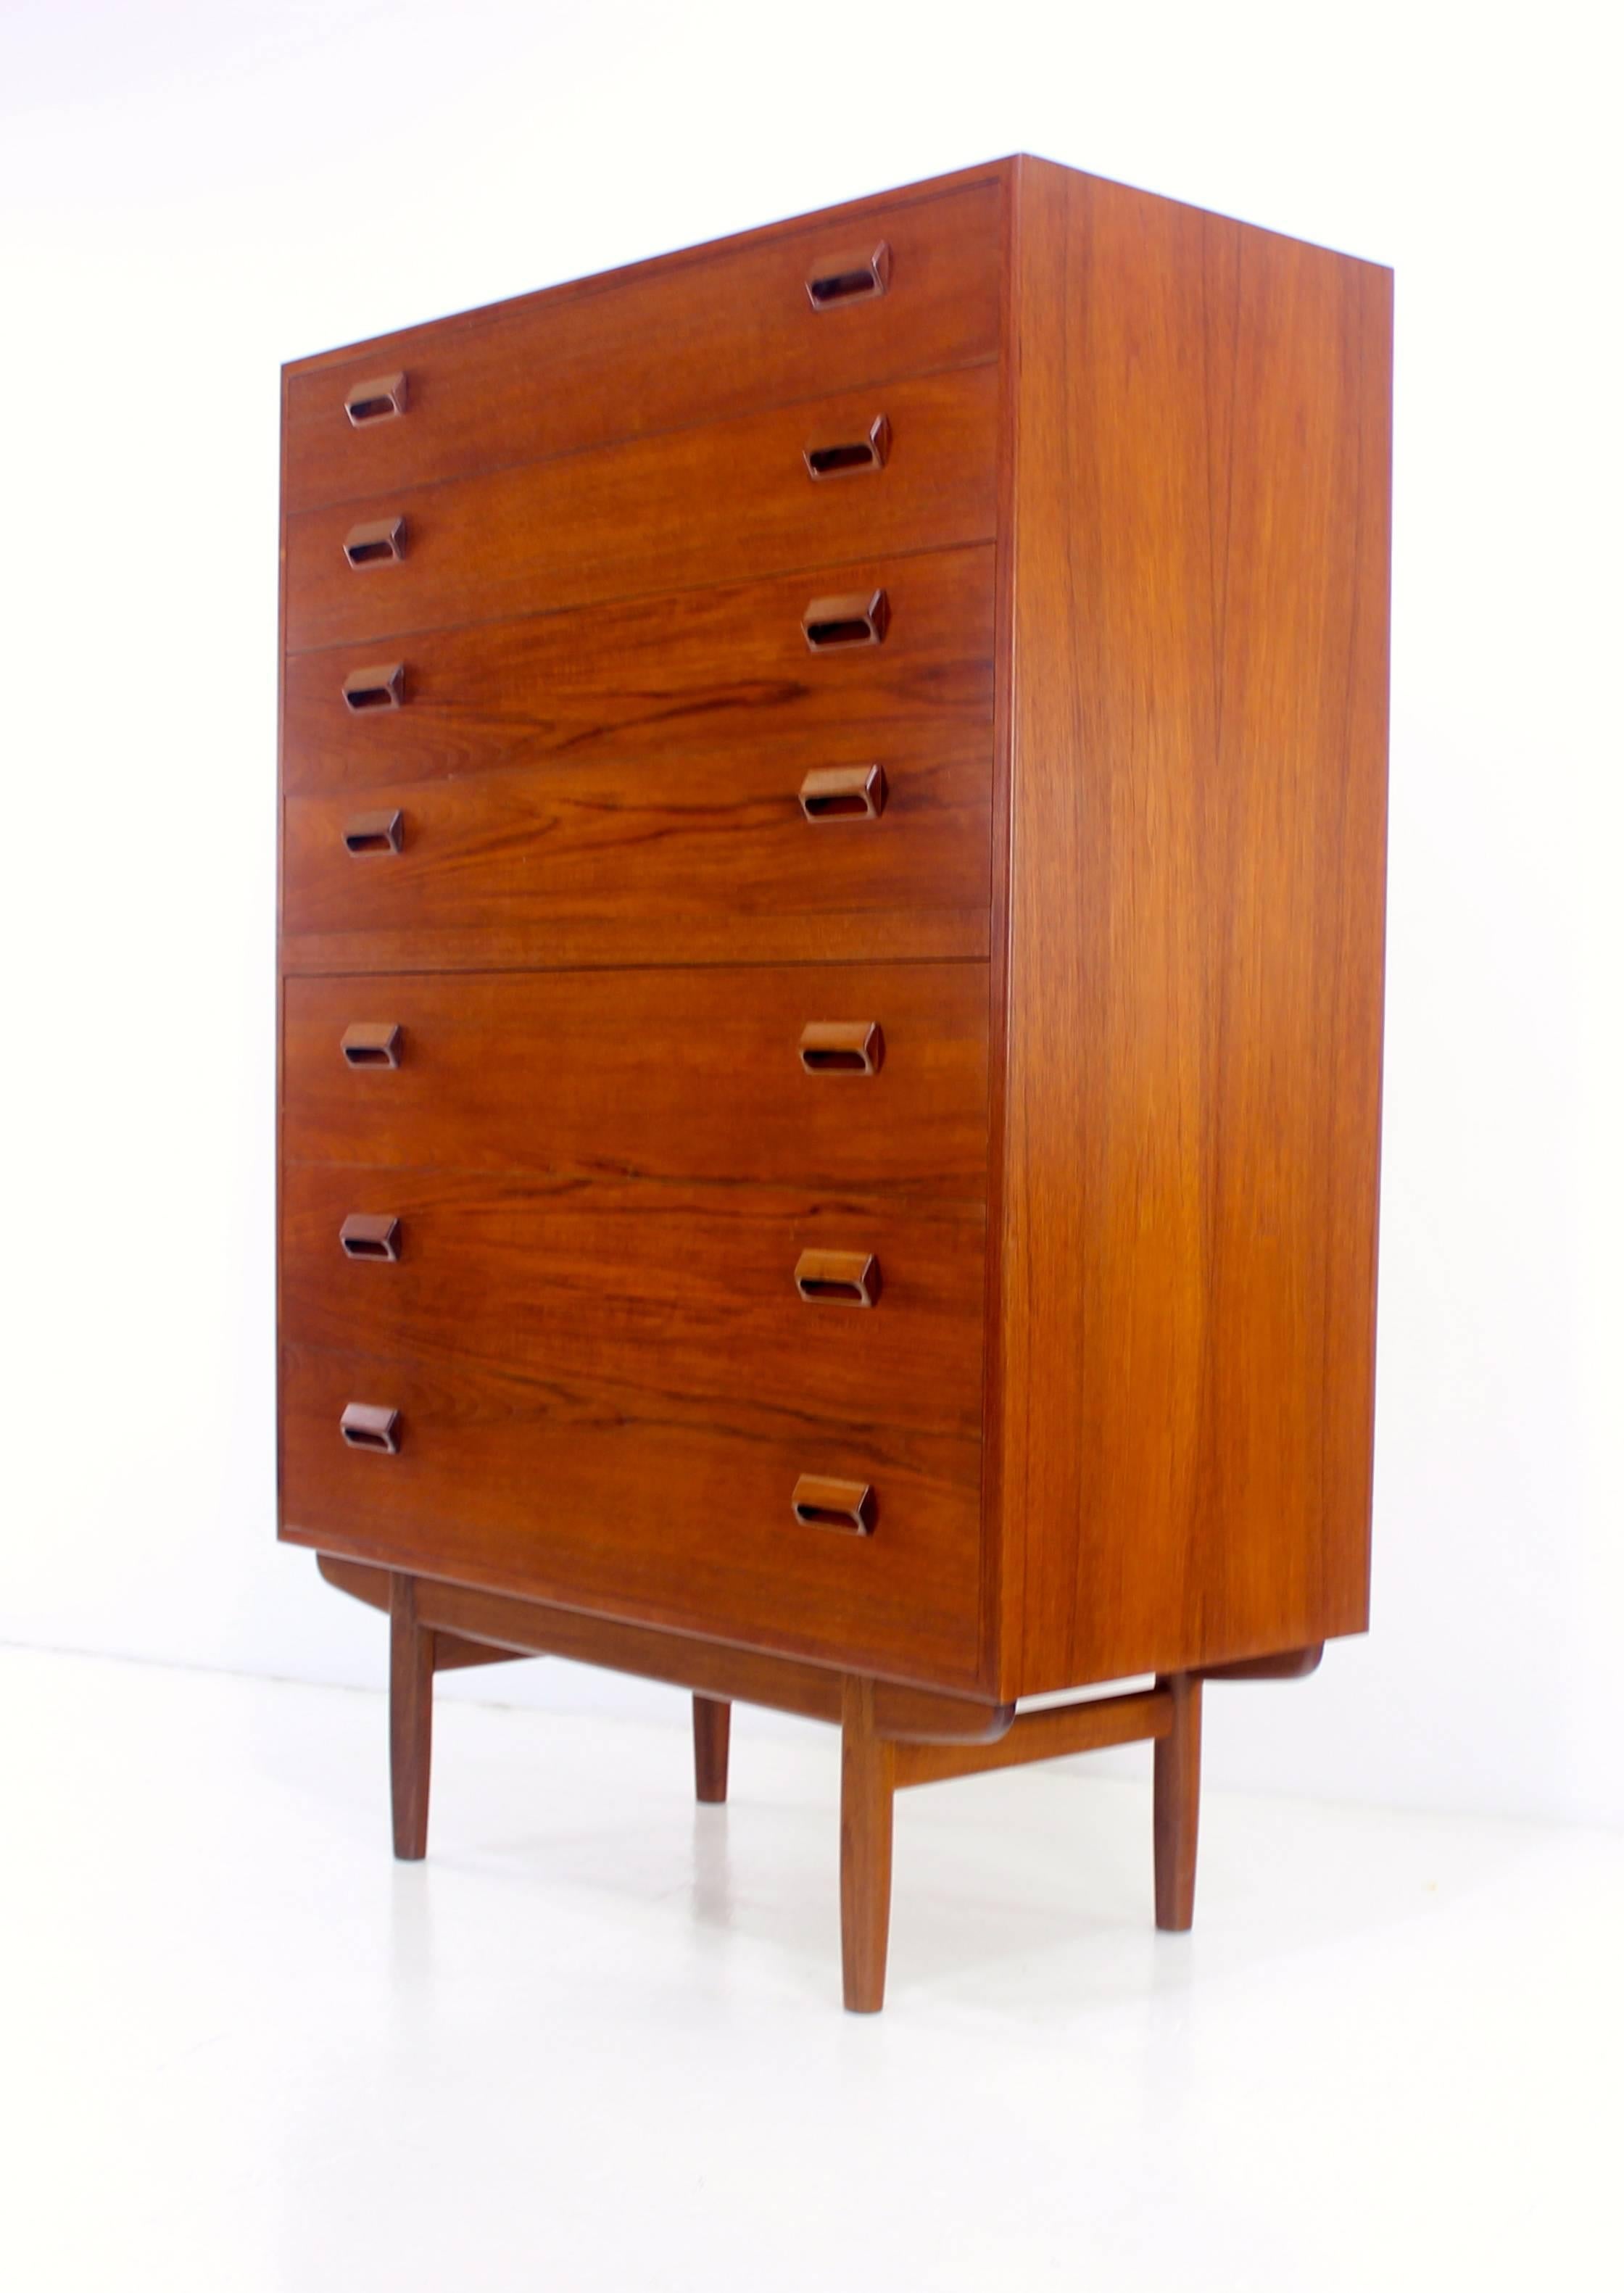 Danish modern highboy dresser designed by Børge Mogensen.
Richly grained teak.
Beautifully crafted base supports seven spacious drawers with signature Mogensen handles.
Professionally restored and refinished by LookModern.
Matchless quality and